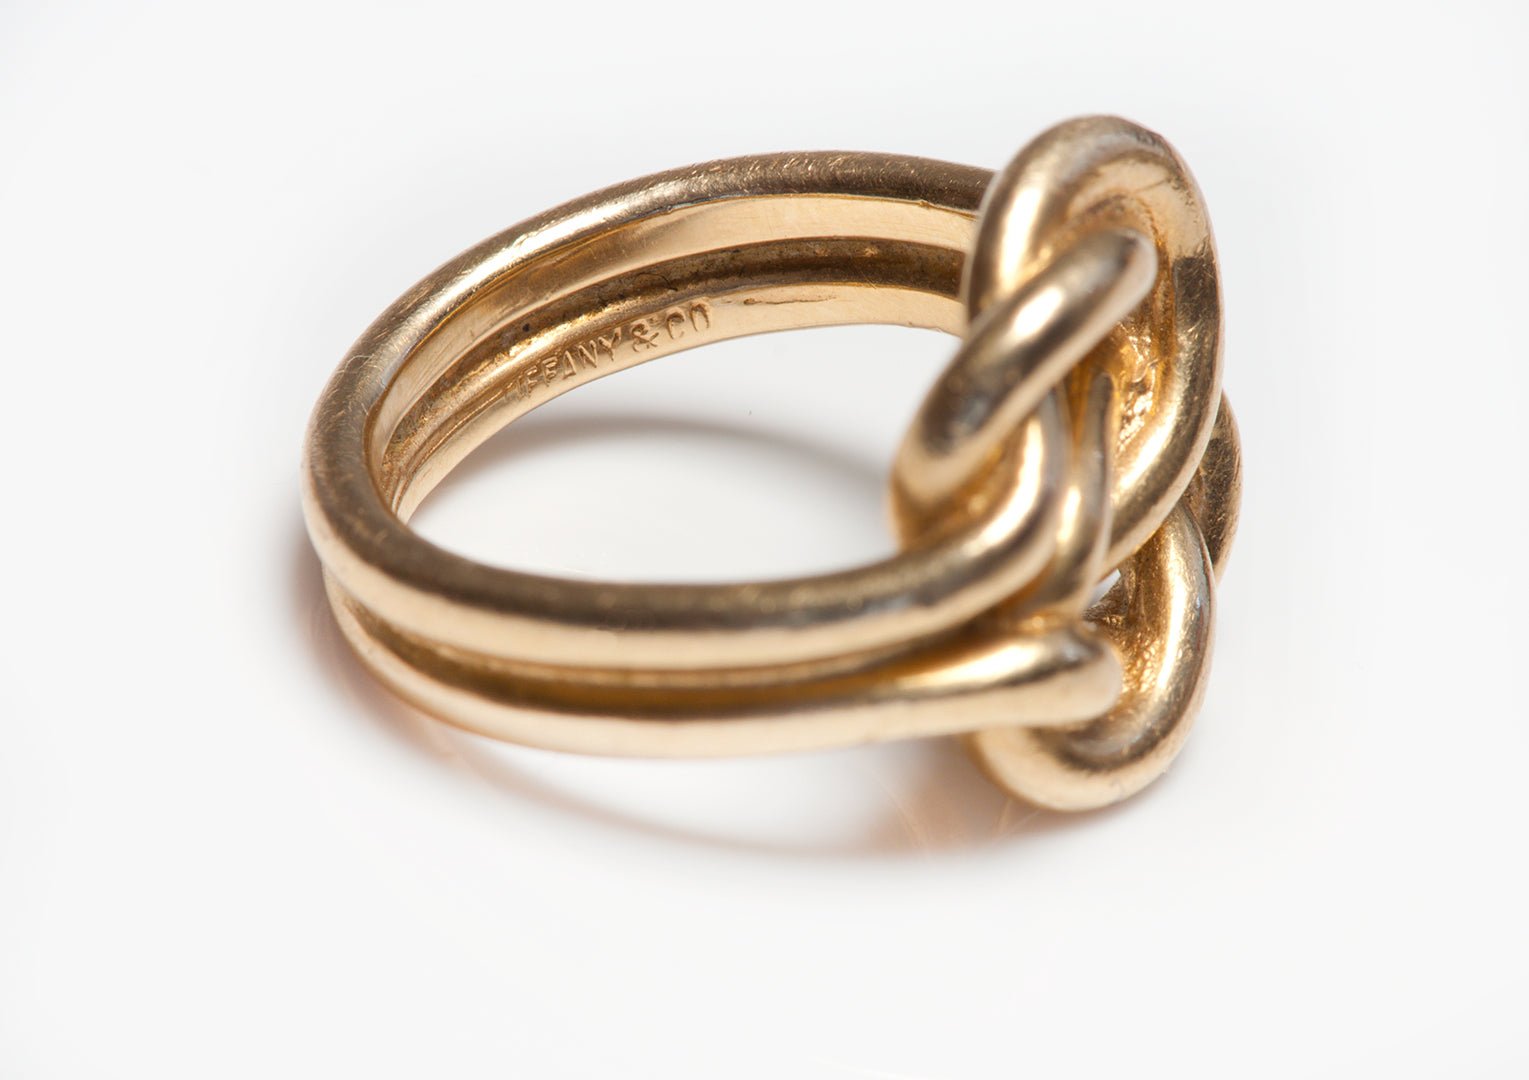 Vintage Tiffany & Co. Gold Lover's Knot Ring